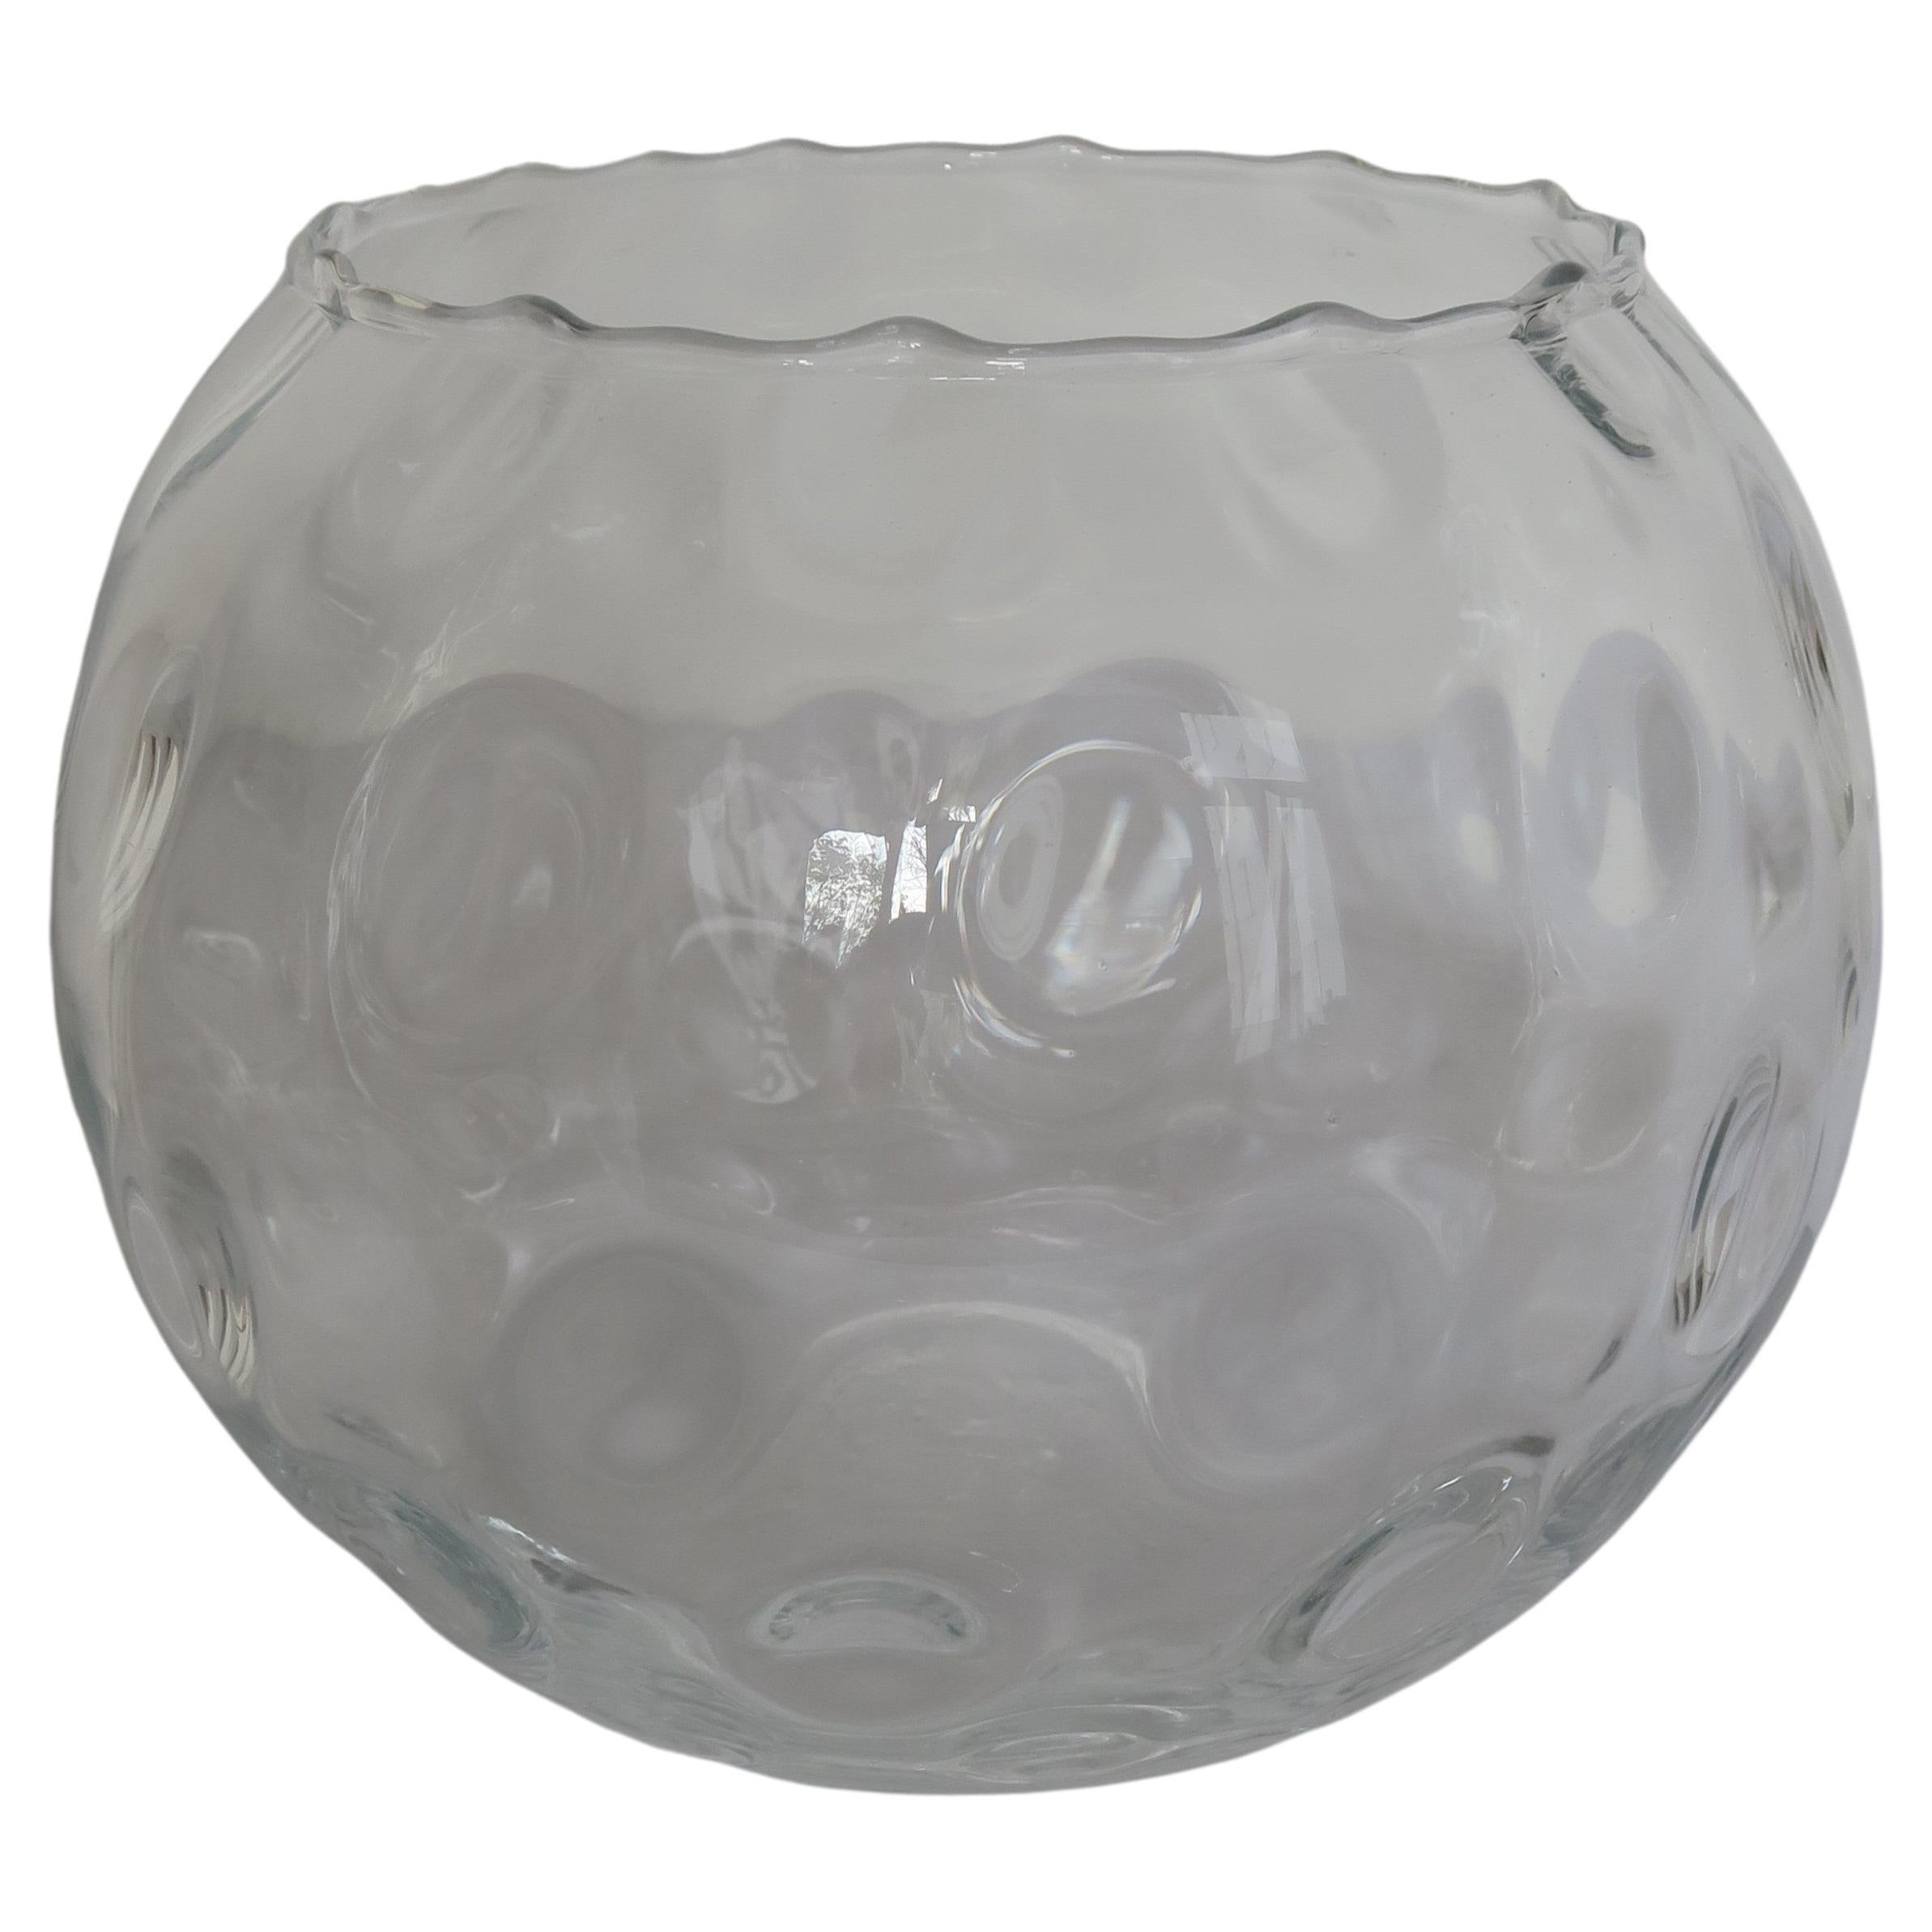 From a collection of glasses by Koloman Moser: extremely rare large fishbowl vase for the Wiener Werkstätte. Colorless glass, from top to bottom; optically blown. Decor Meteor. Made by Adolf Meyr`s nephew for E. Bakalowits sons - distributed by